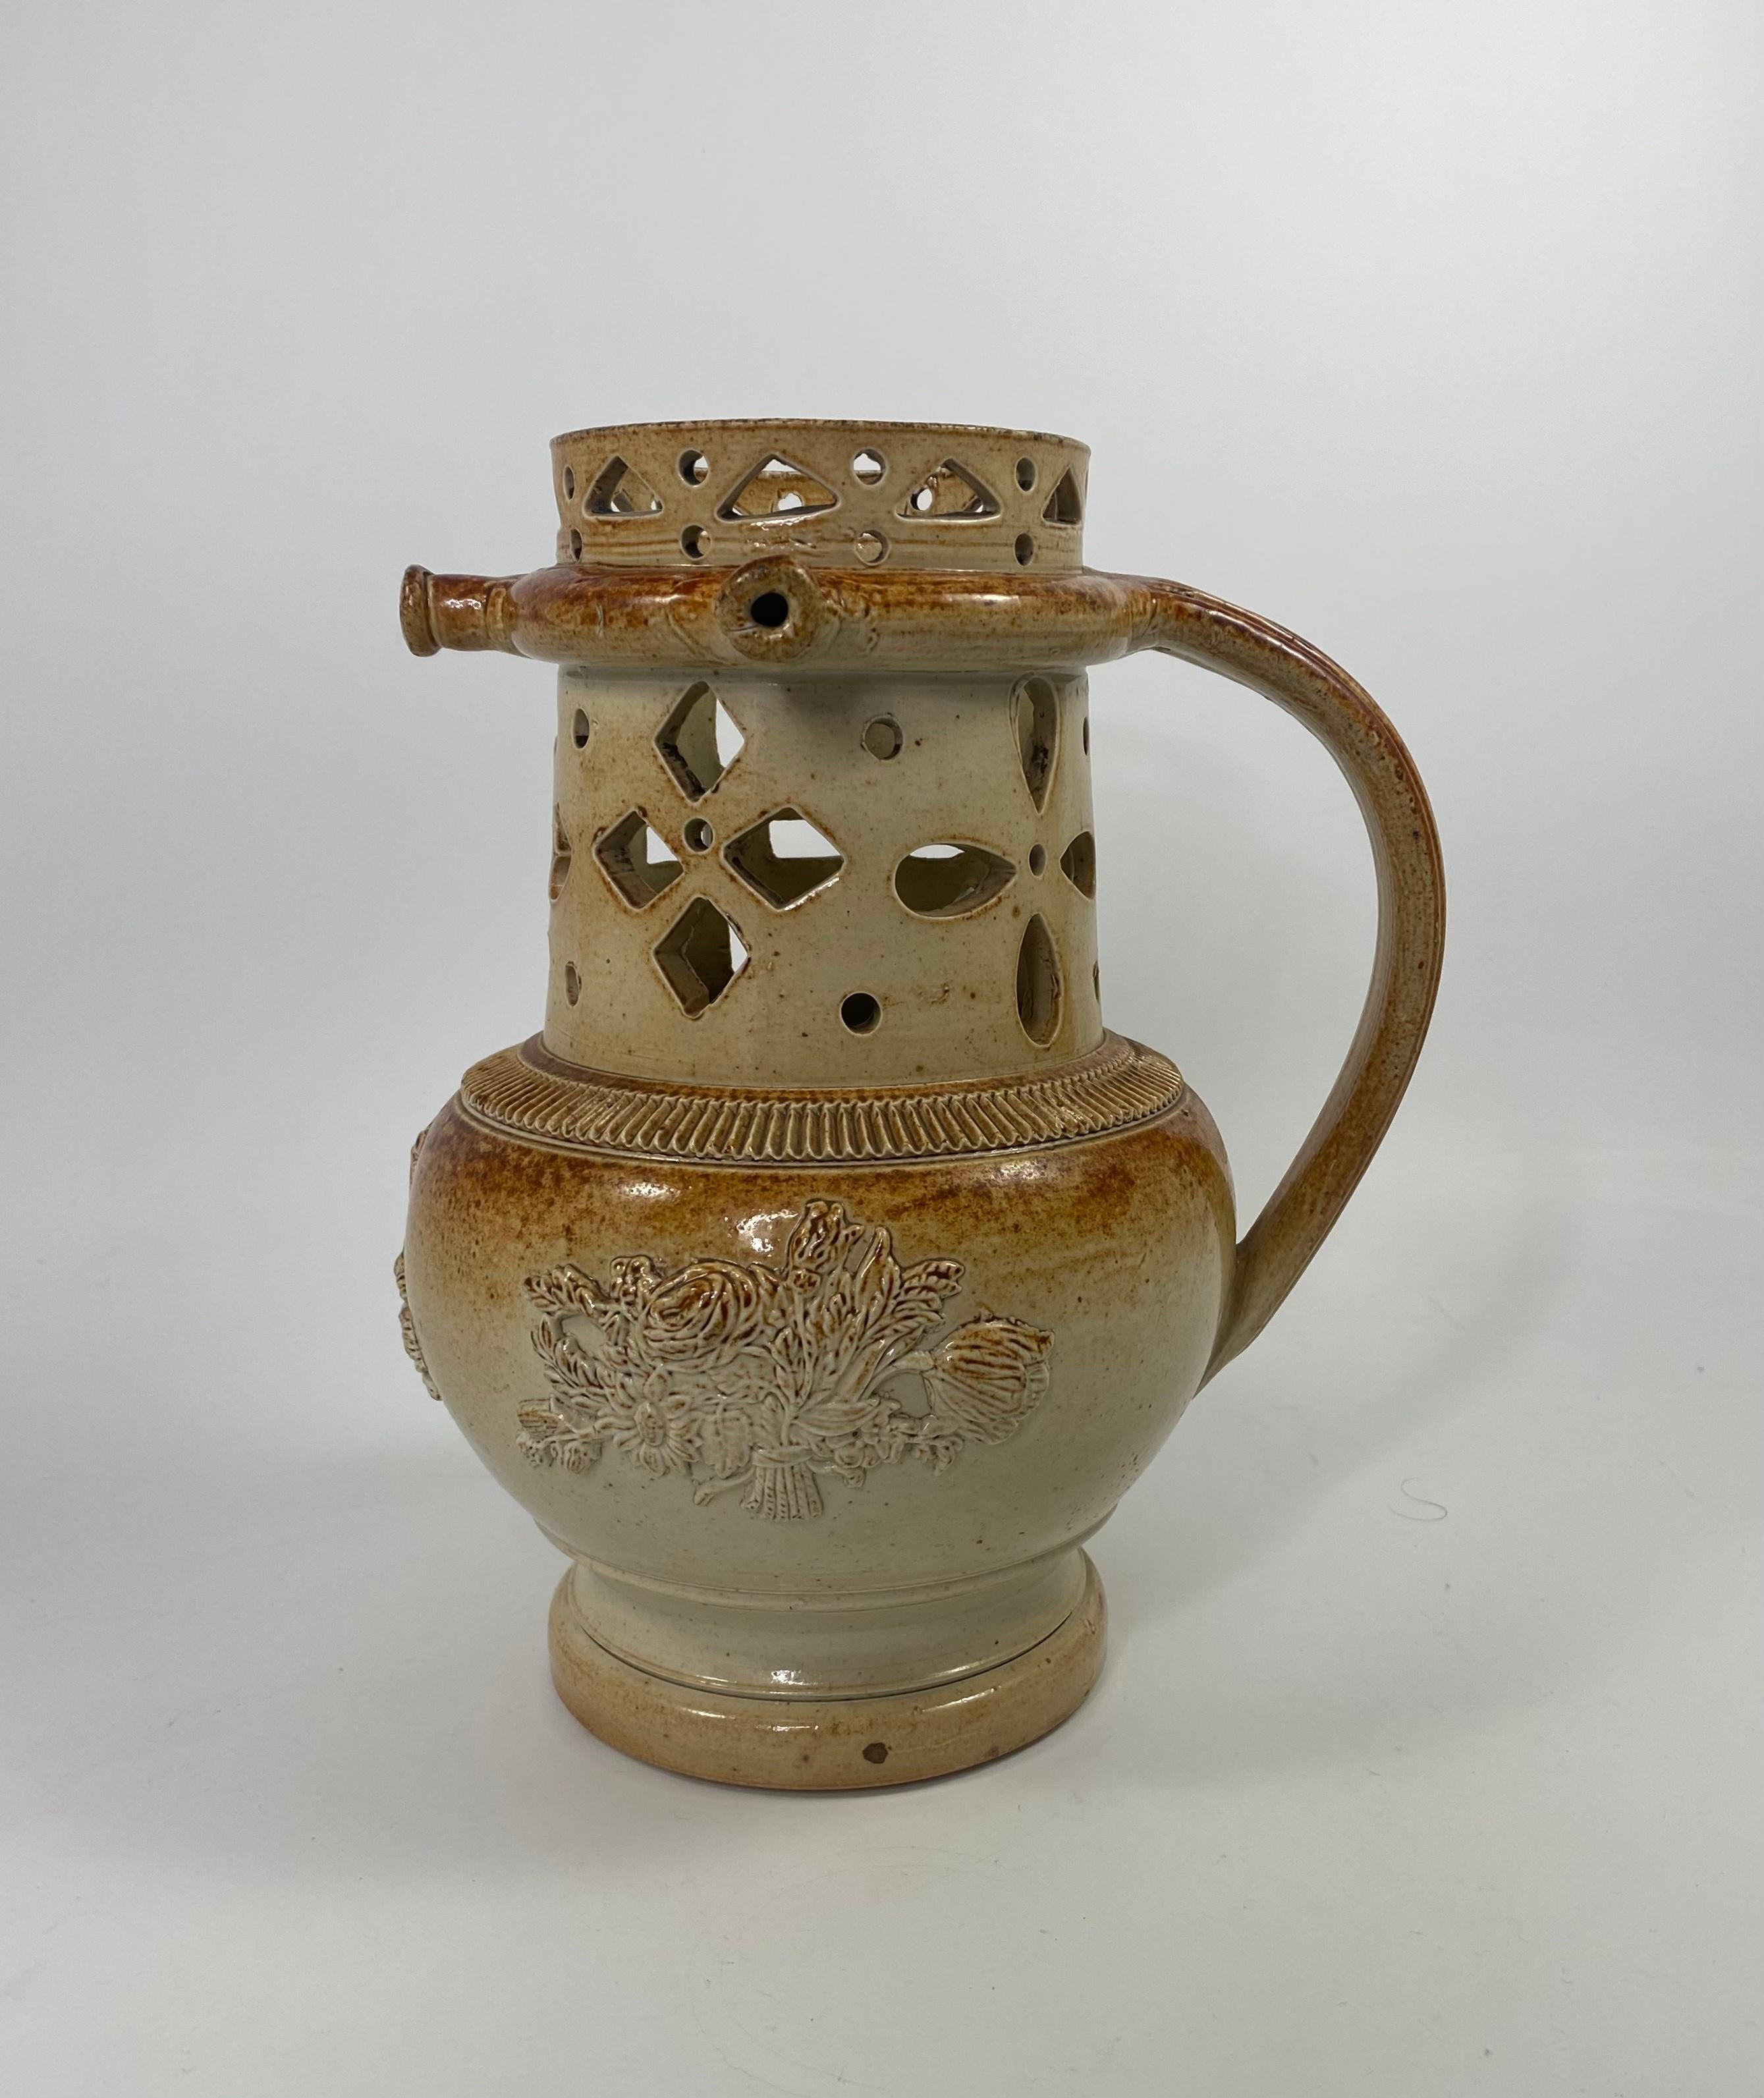 A fine and large Brampton saltglazed stoneware Puzzle Jug, c. 1840. The jug sprigged to the body, with reliefs of musical instruments, a spray of flowers and a windmill. Having three spouts, which are connected to the hollow handle. The neck